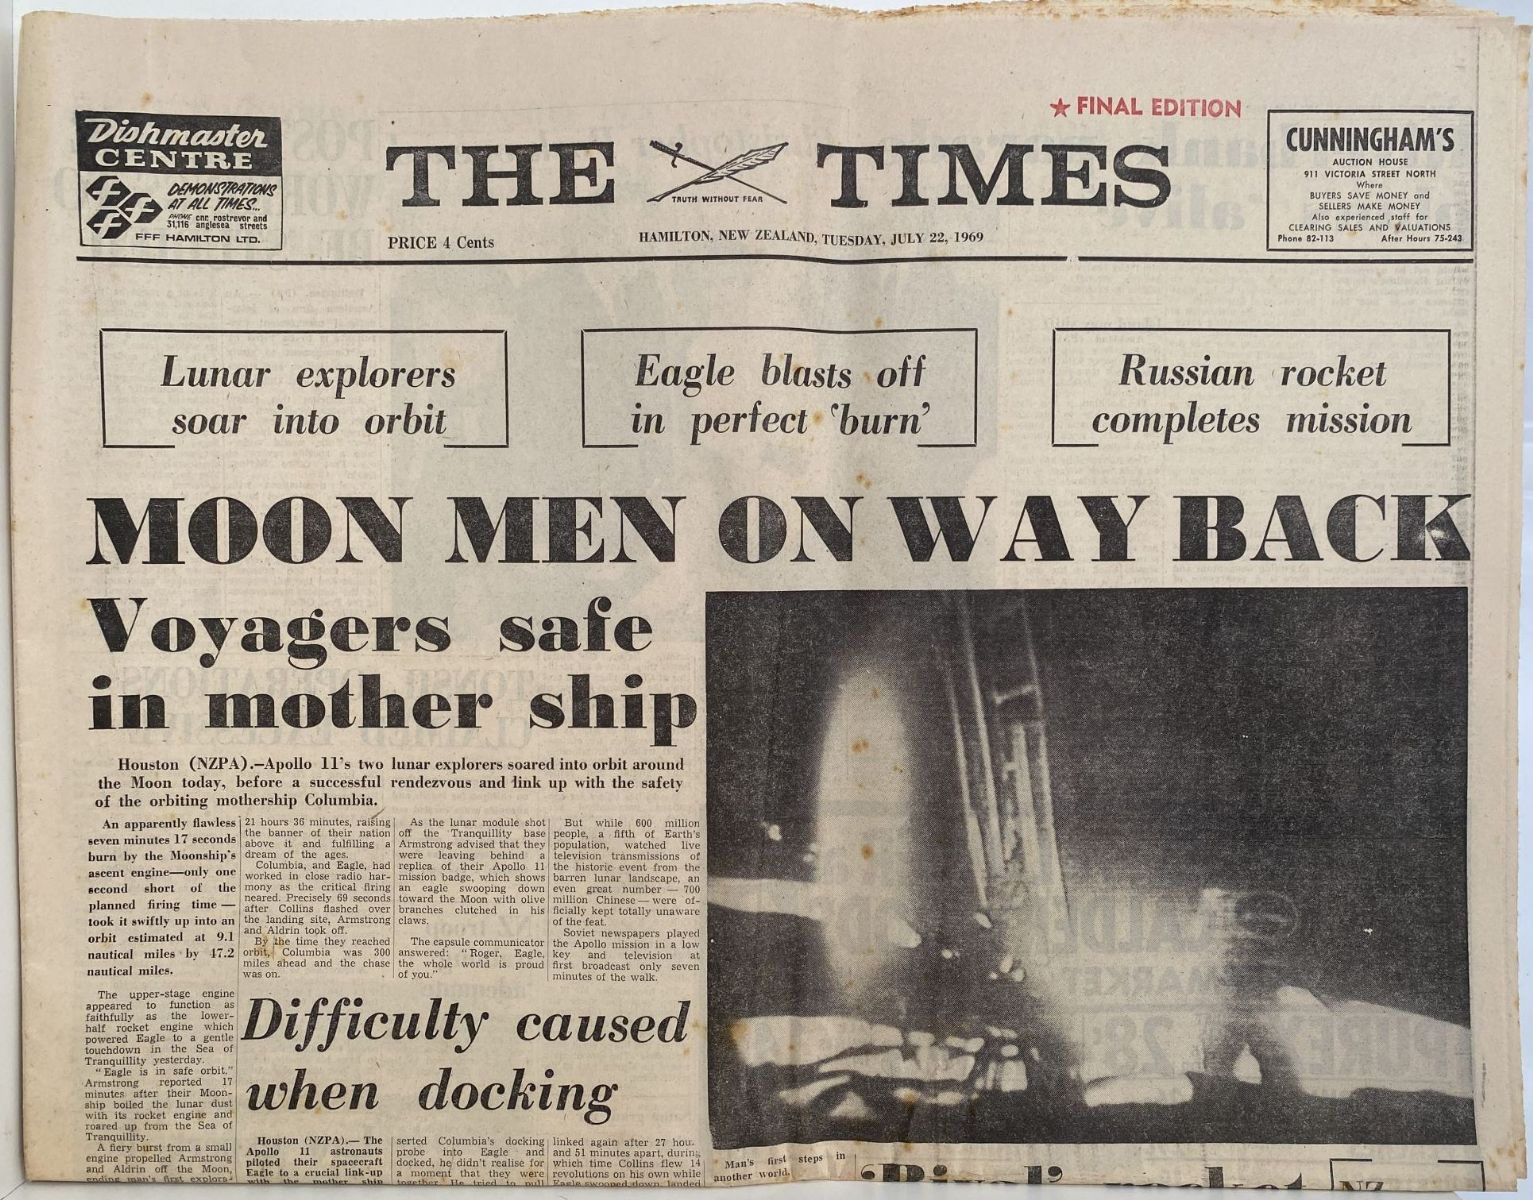 OLD NEWSPAPER: The Waikato Times, 22 July 1969 - Moon Landing Special